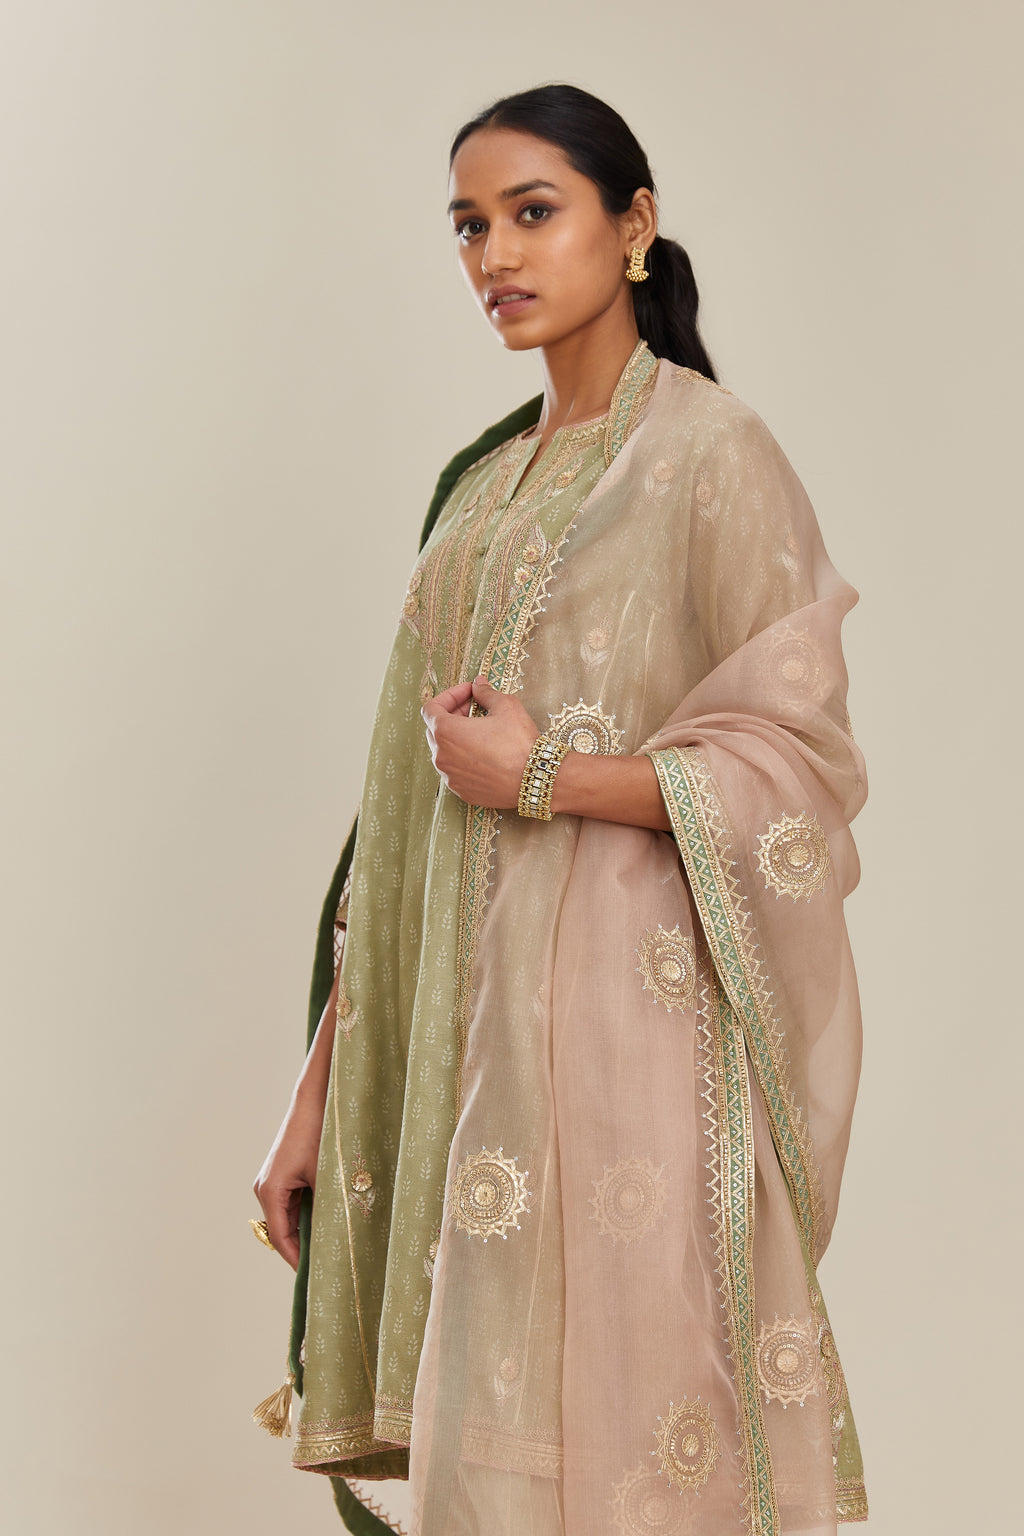 Sage green hand block printed short kalidar silk chanderi kurta set with button placket and all over gold gota and zari embroidery.